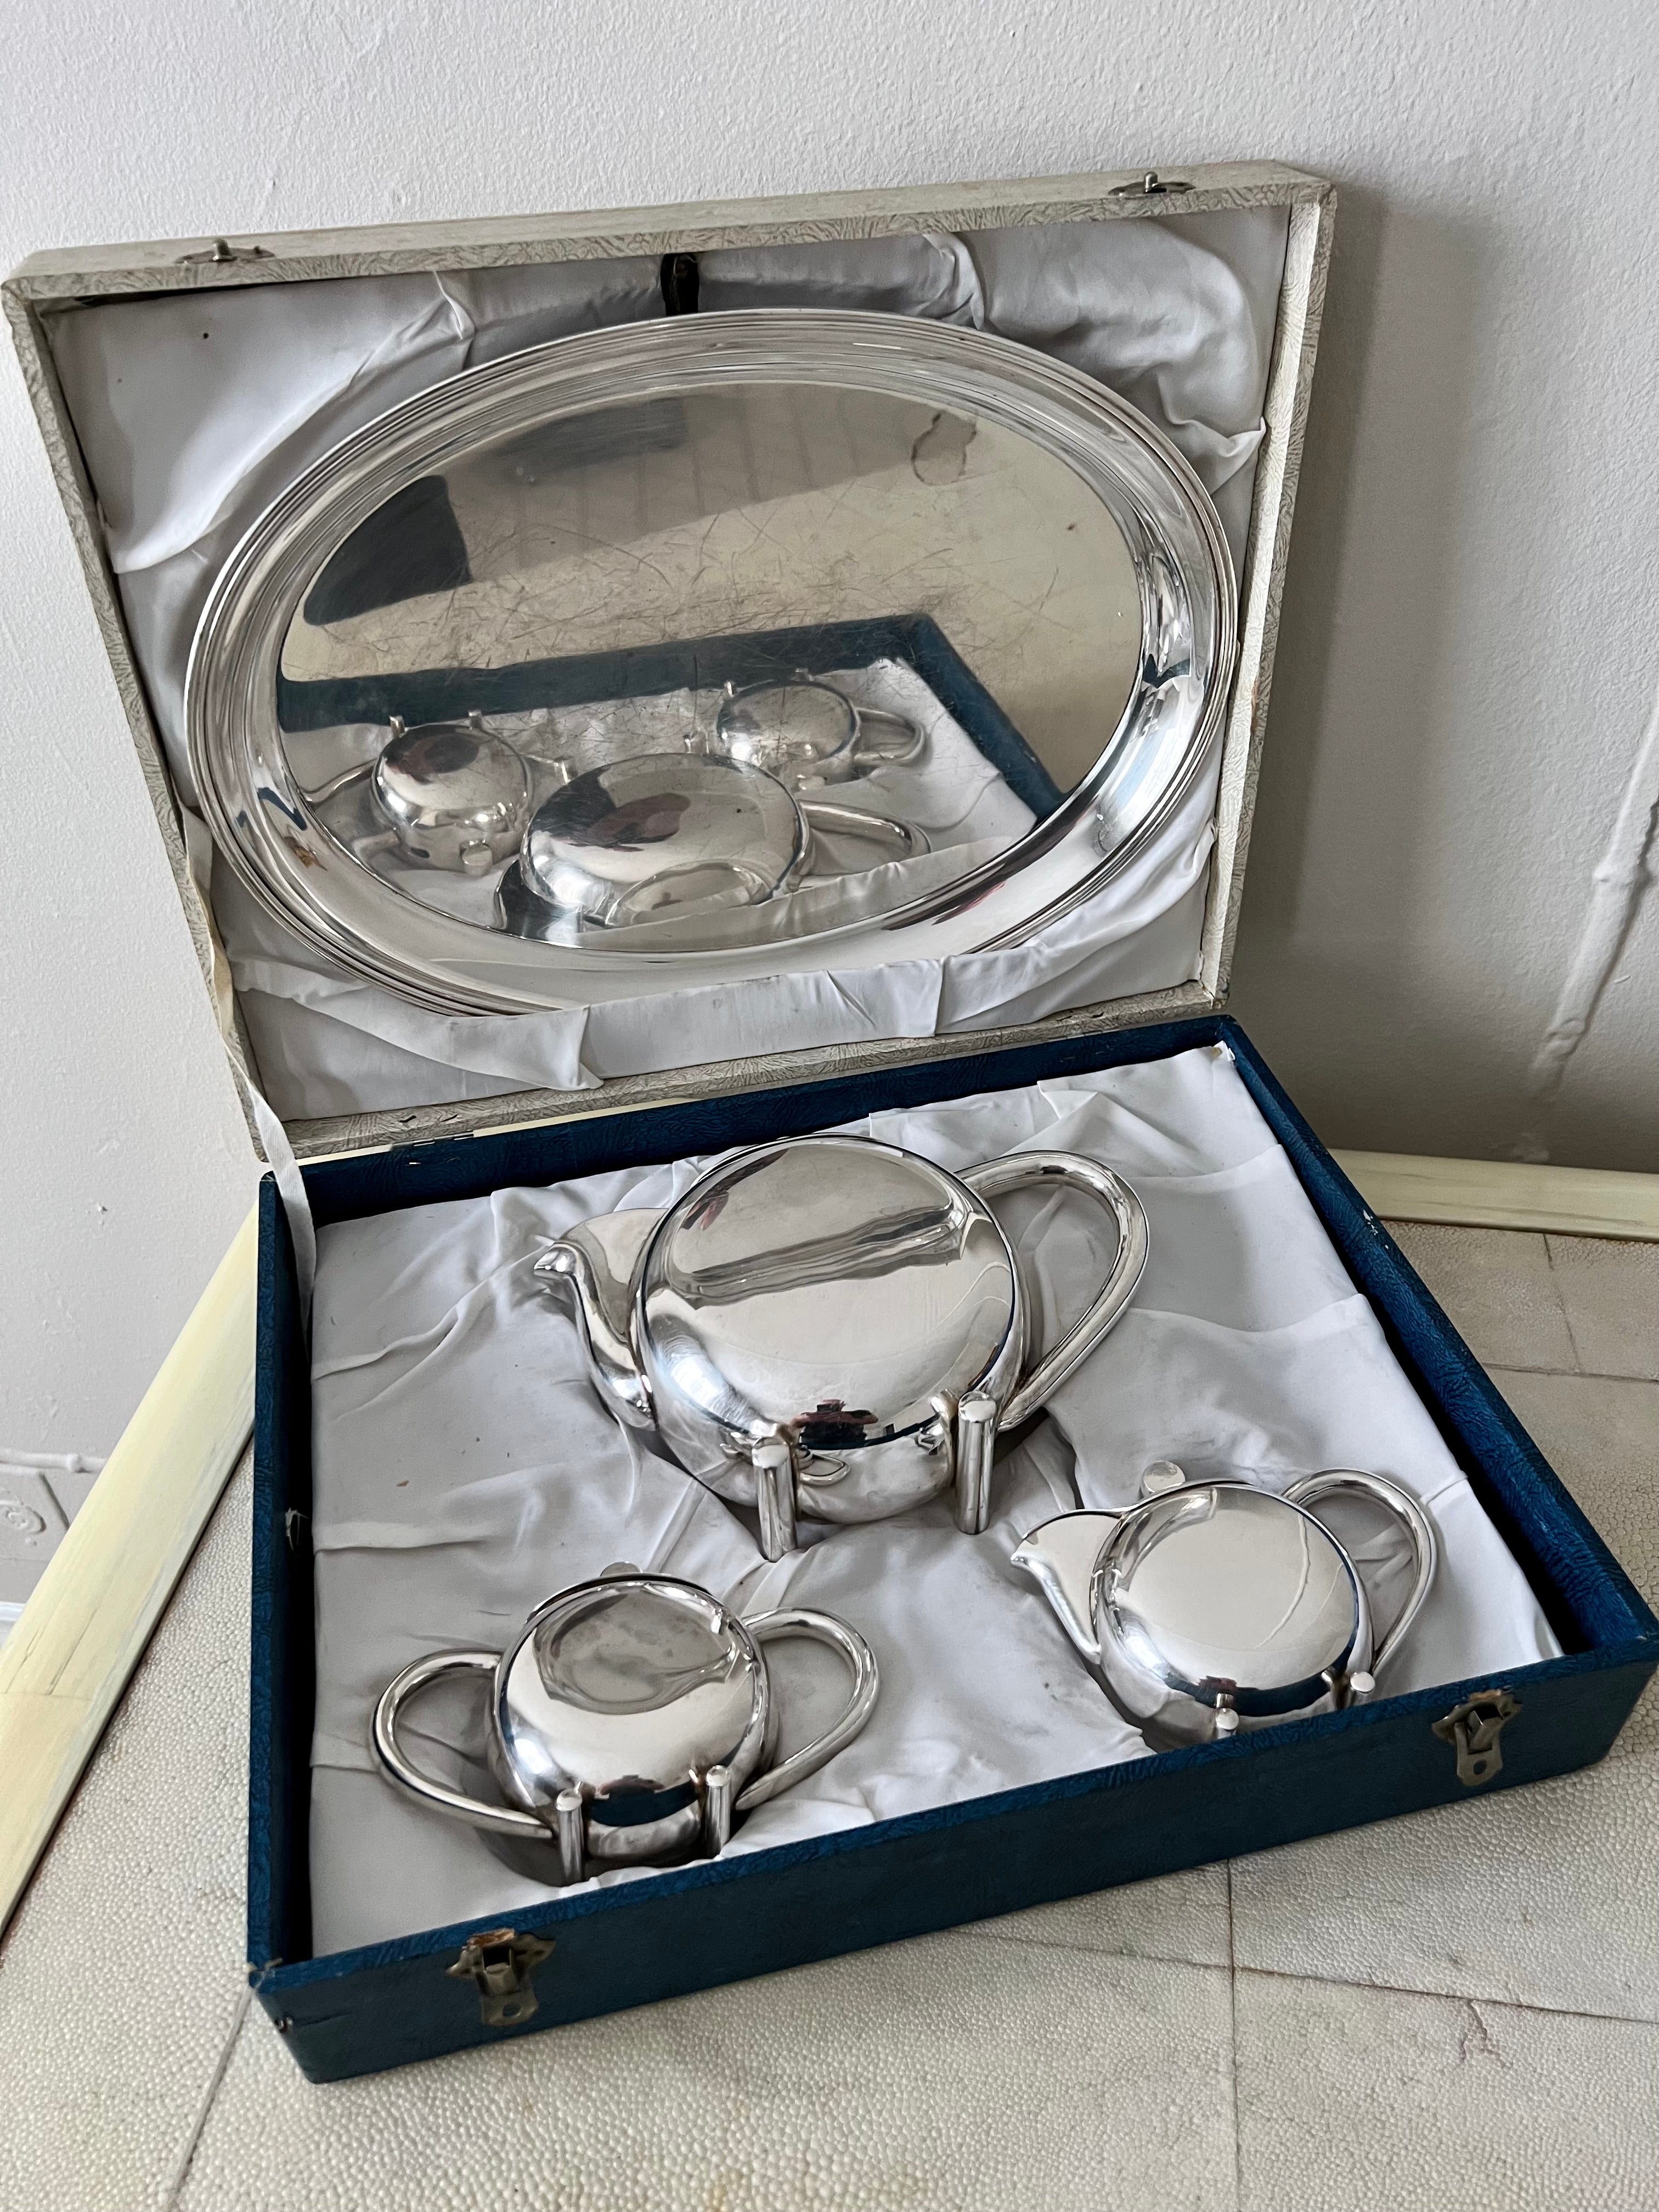 Silver tea set with tray, pot, cream canister, and sugar canister. The set comes in a blue and white double-clasp box for storage or transport. 

Catches light beautifully for a complement to any table or teatime. 

The dimensions listed are for